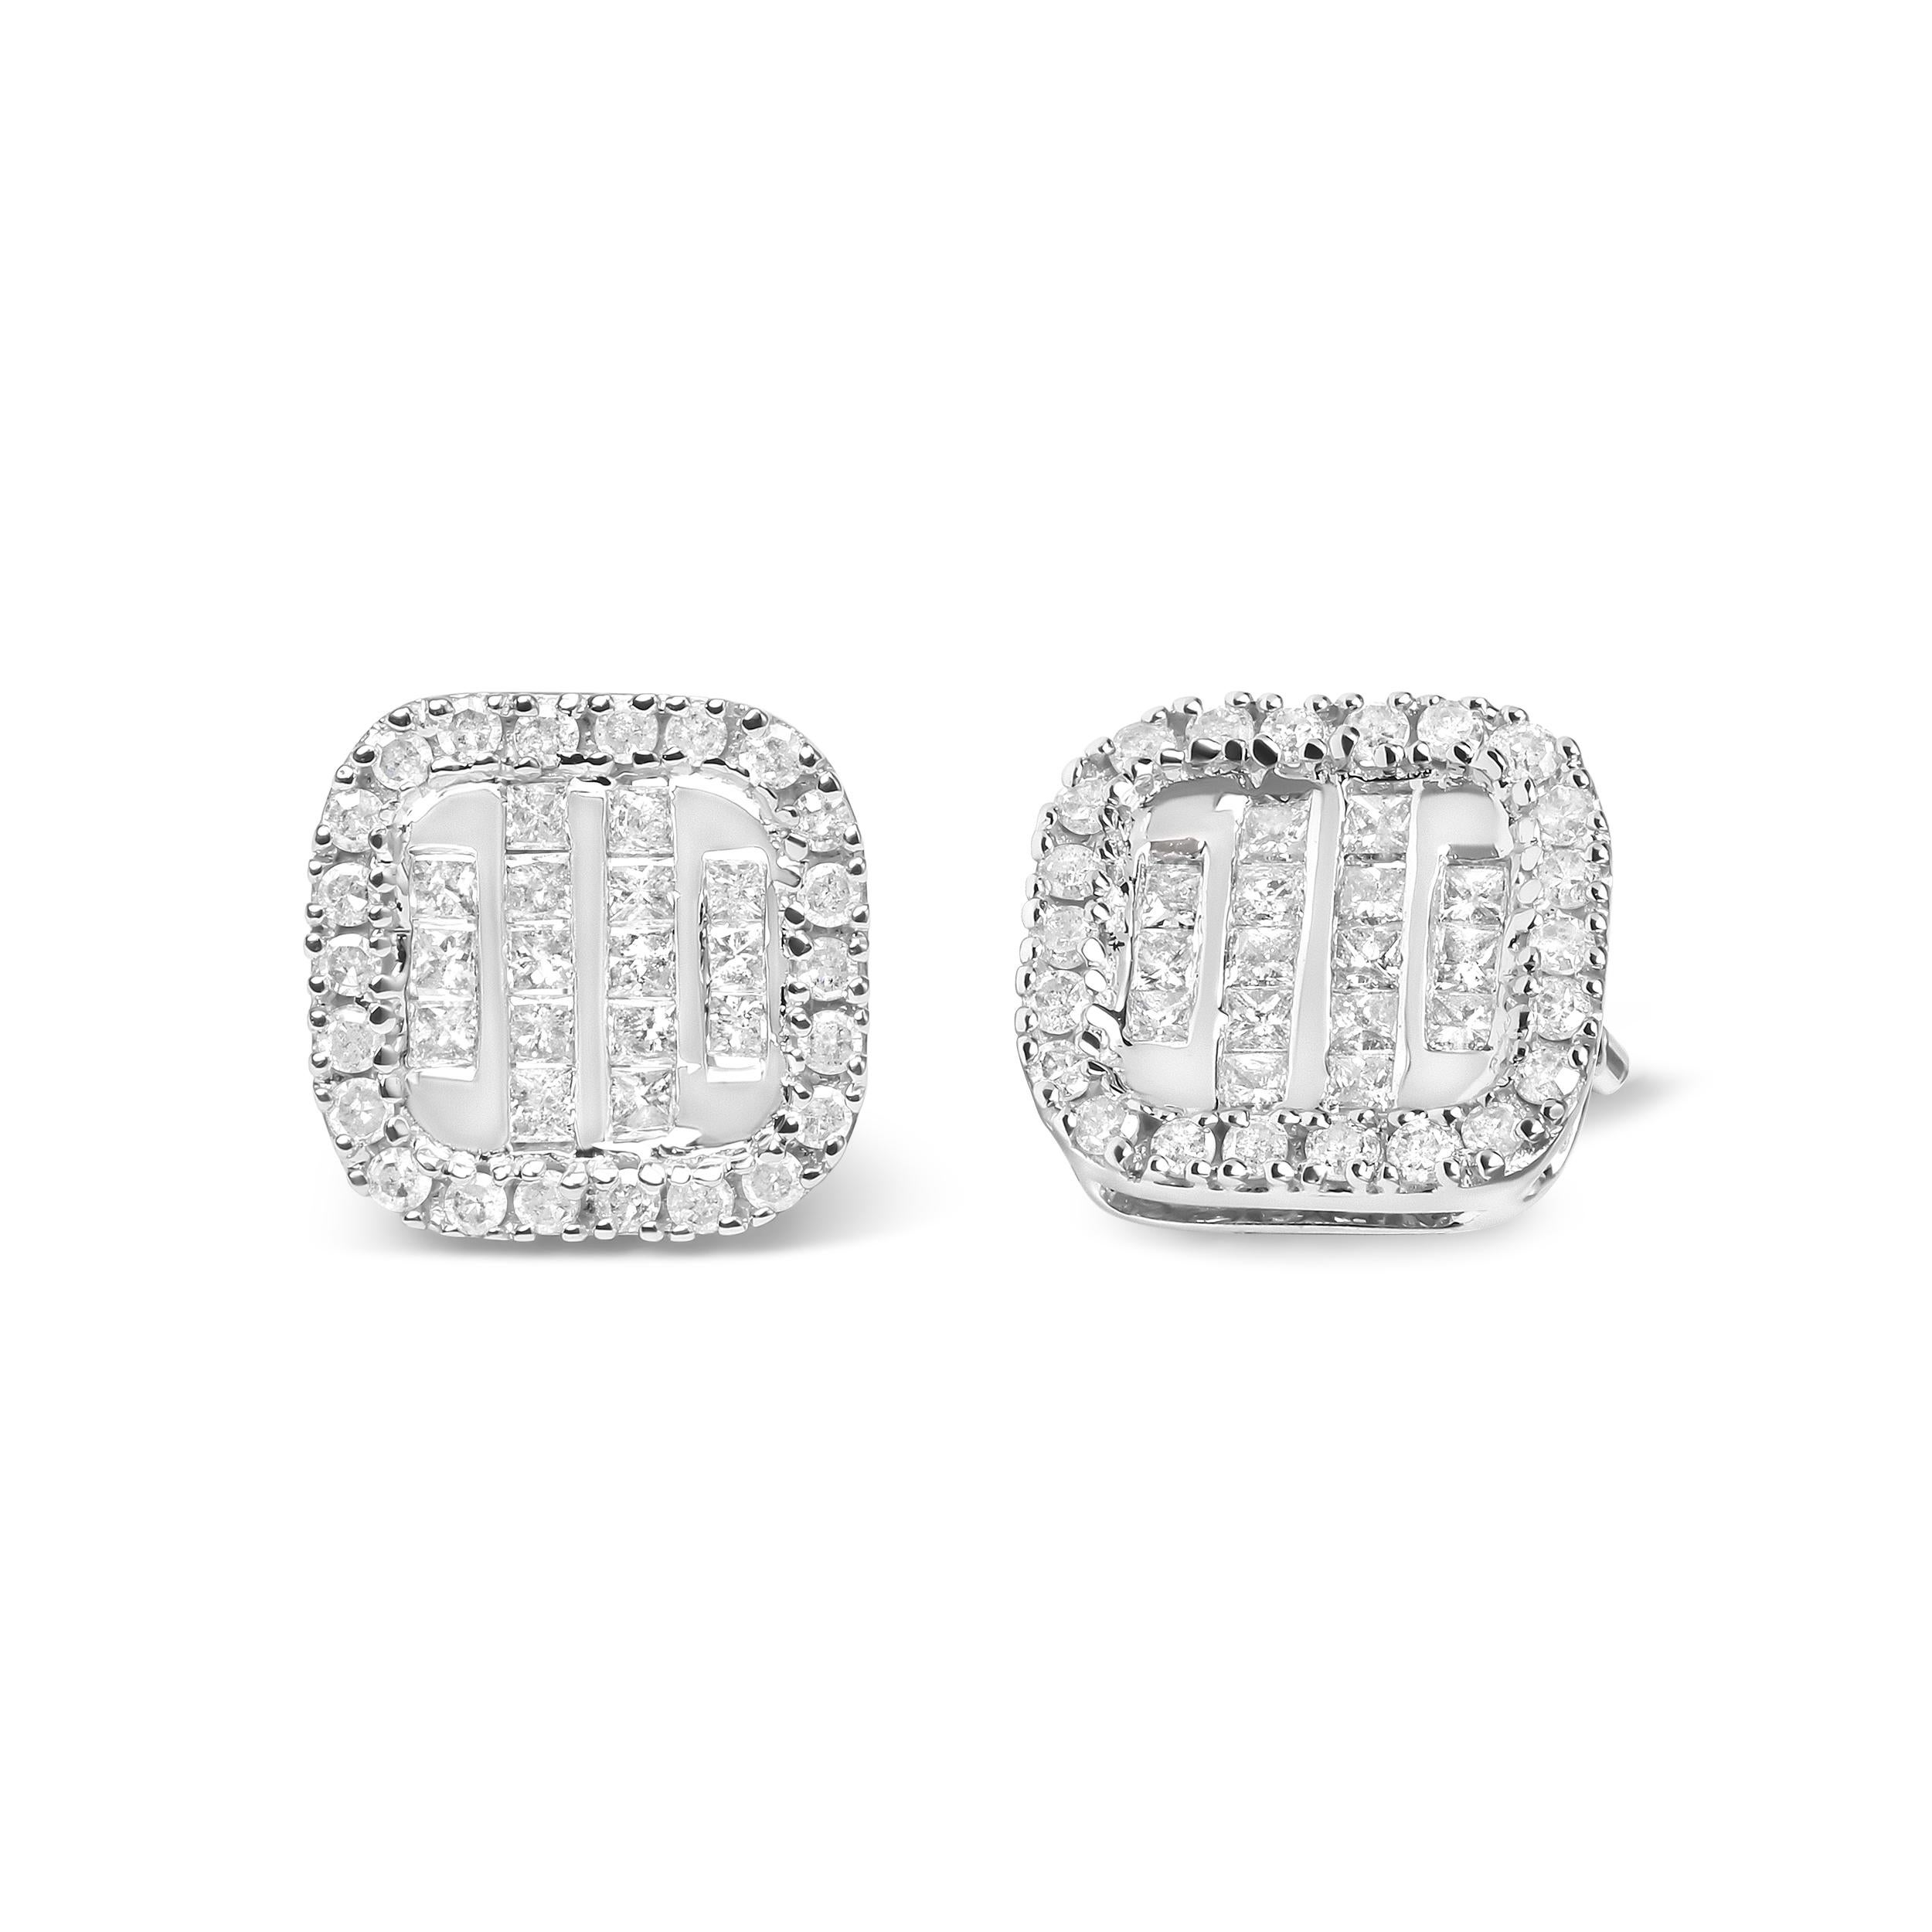 Introducing a stunning set of earrings, designed to make you feel like royalty. Each earring features a dazzling composite of 32 princess-cut diamonds, encircled by 44 round-cut diamonds in a halo setting. The 10K white gold metal perfectly